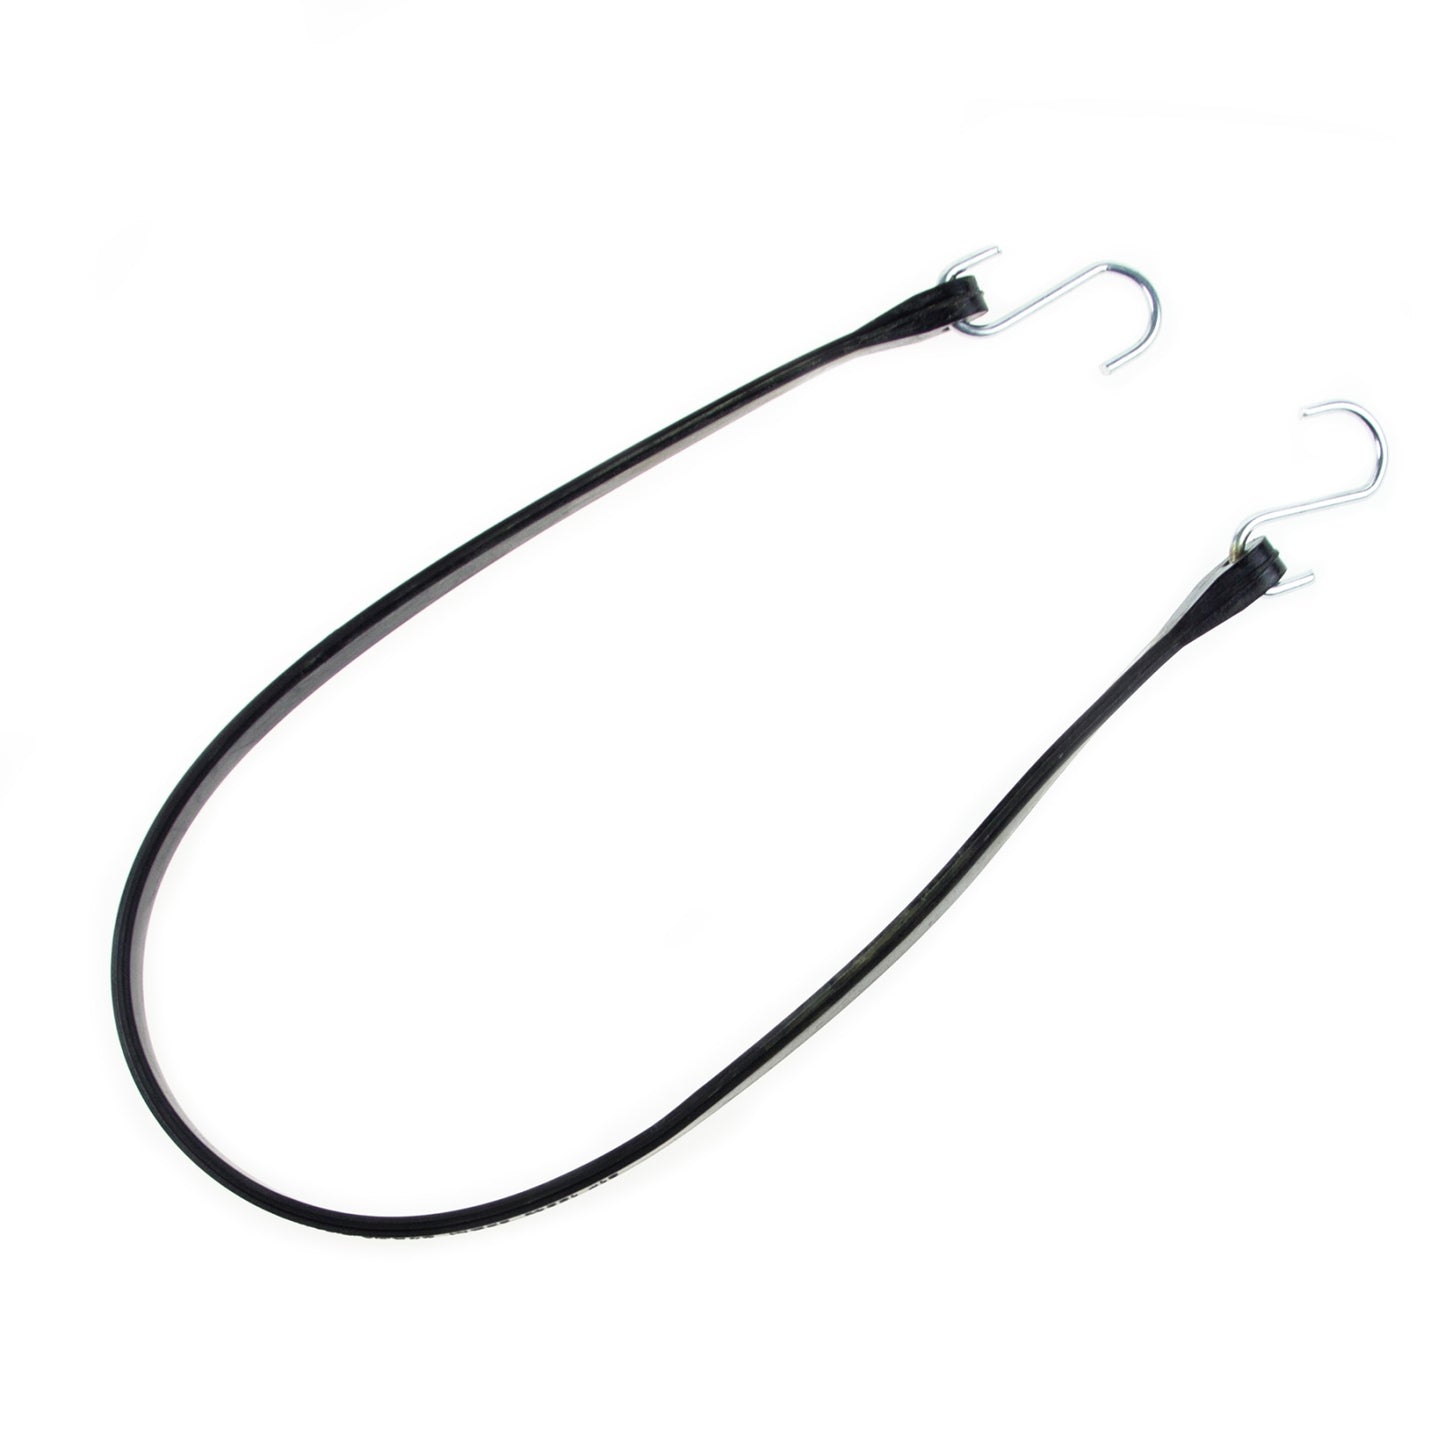 31 INCH RUBBER TIE DOWN - 10 PACK